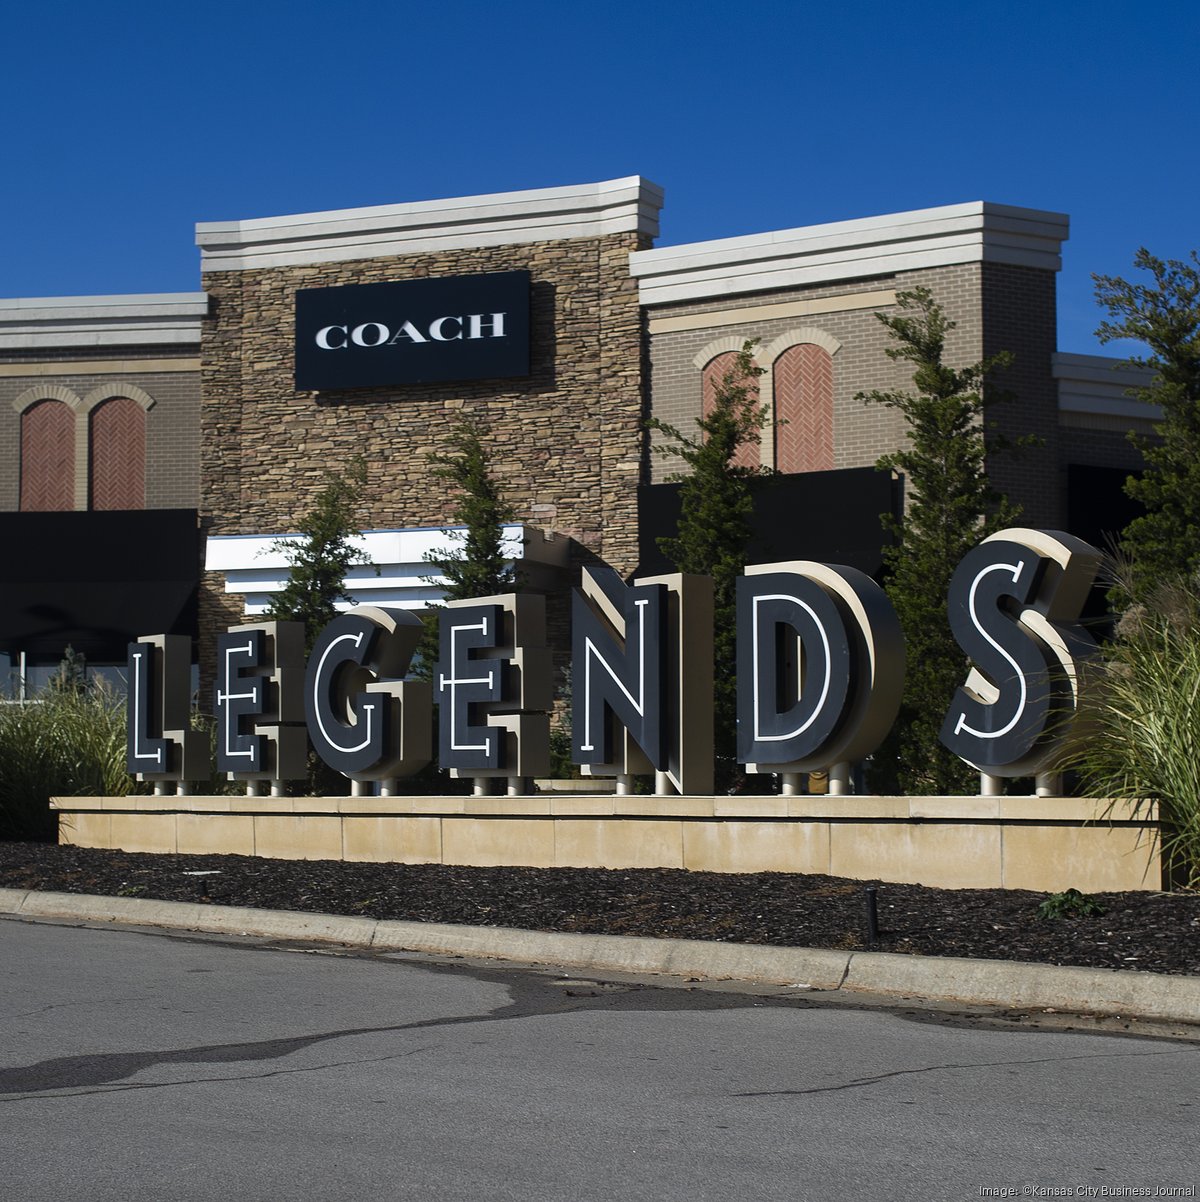 Steady stream of shoppers arrive at The Legends Outlets in KCK 